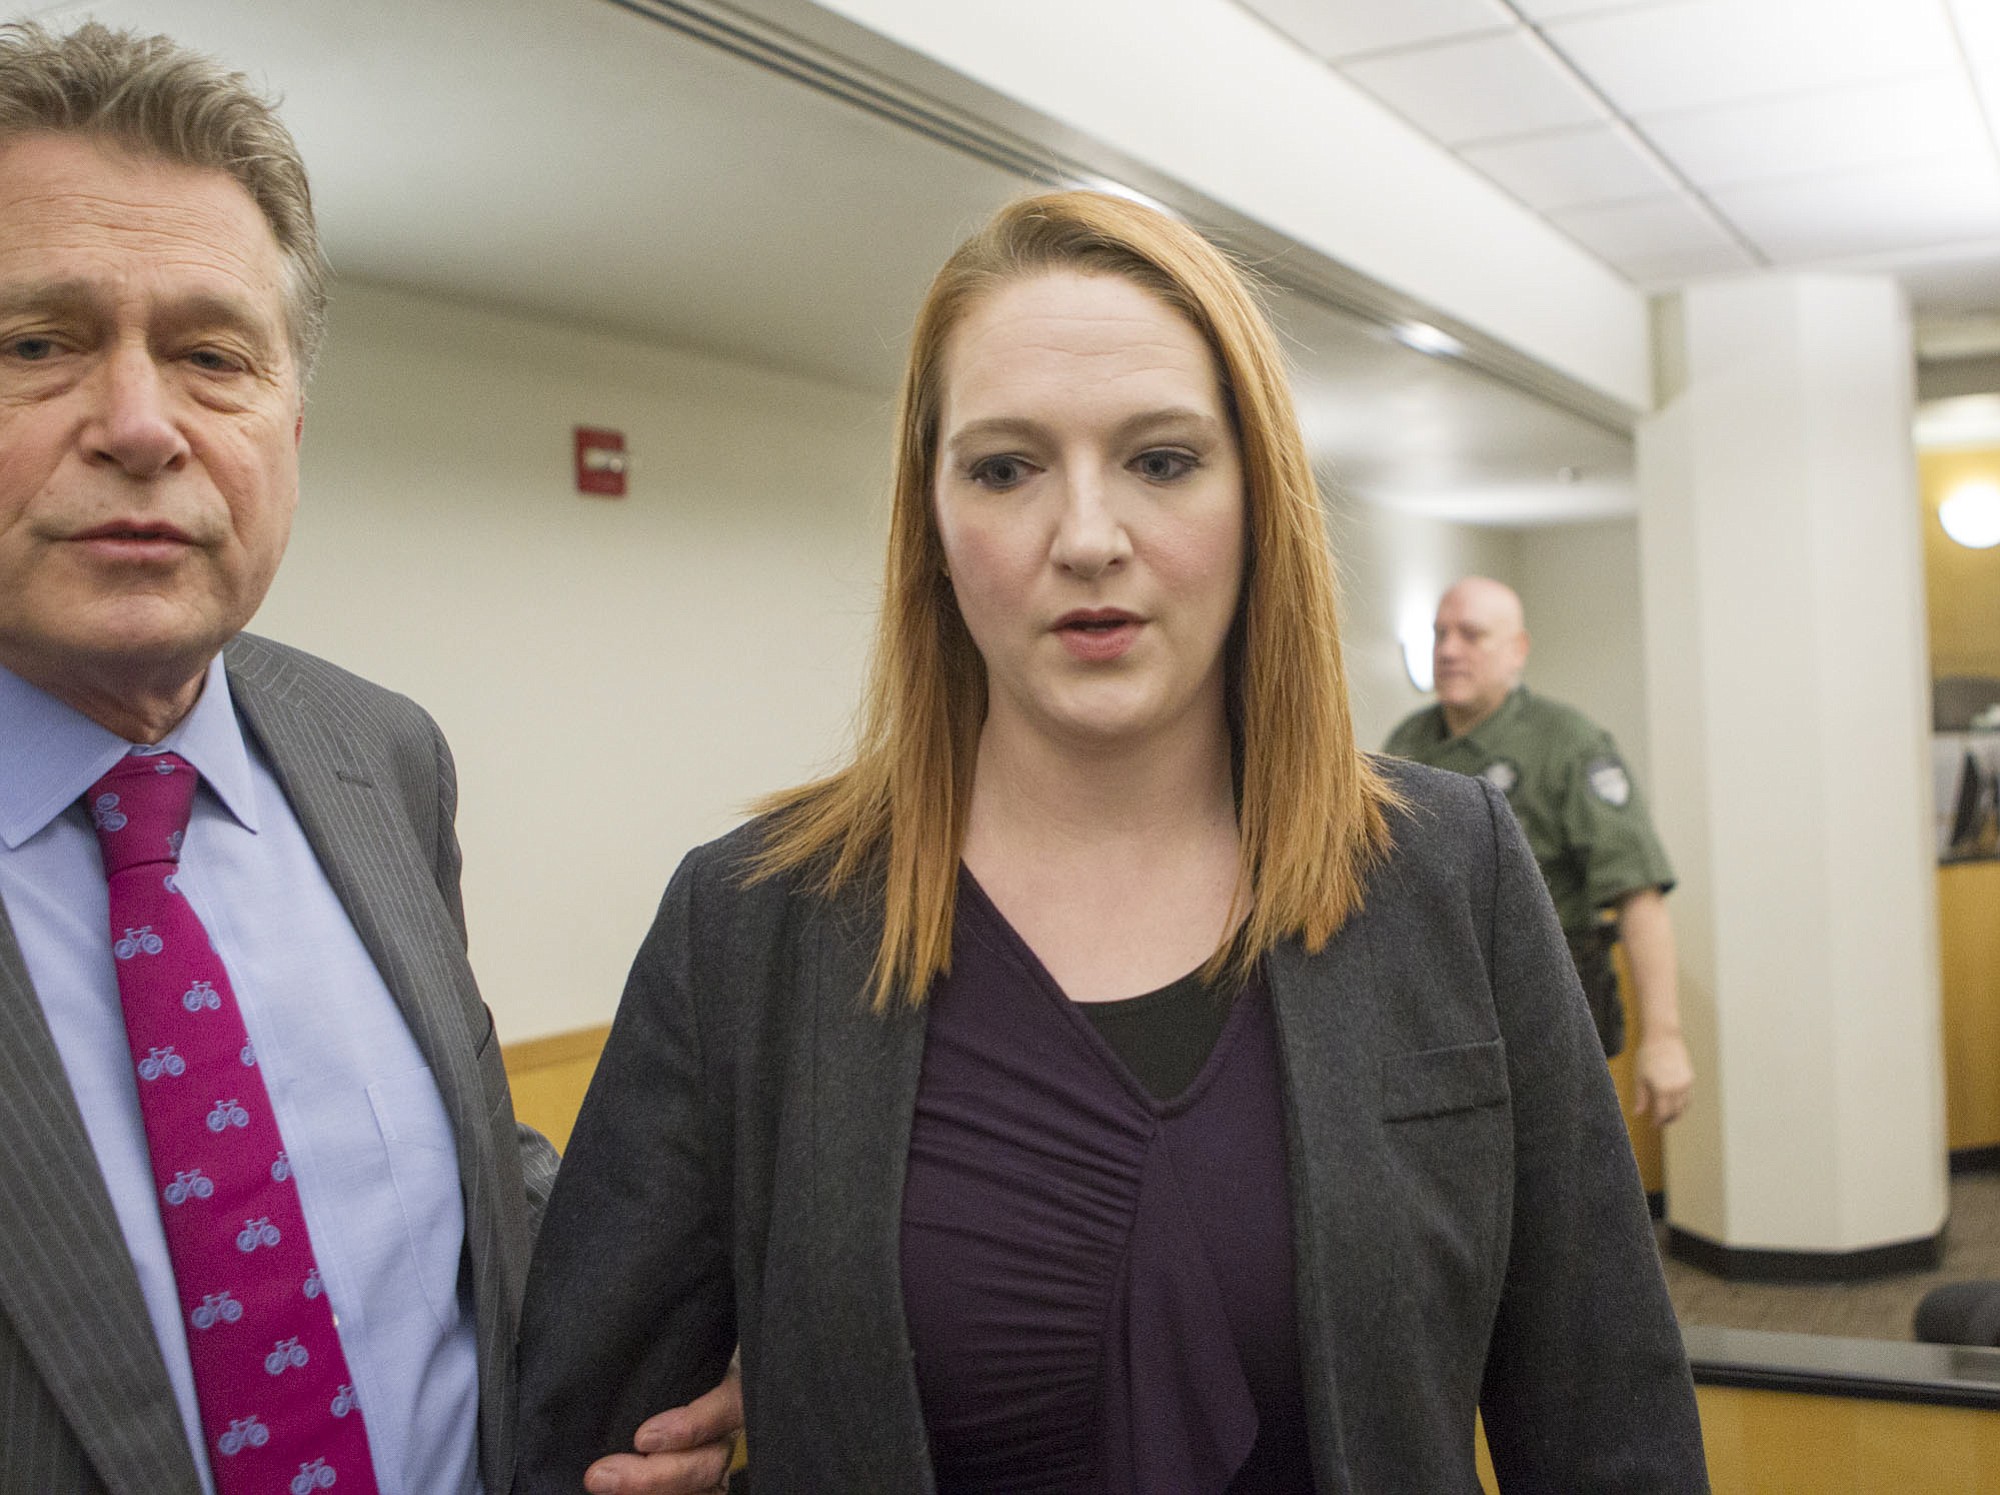 Evergreen High School drama teacher Stephanie McCrea, 35, arrives at the Clark County Courthouse in Vancouver with her attorney, Steven Thayer, for her arraignment in this Feb. 11 file photo.